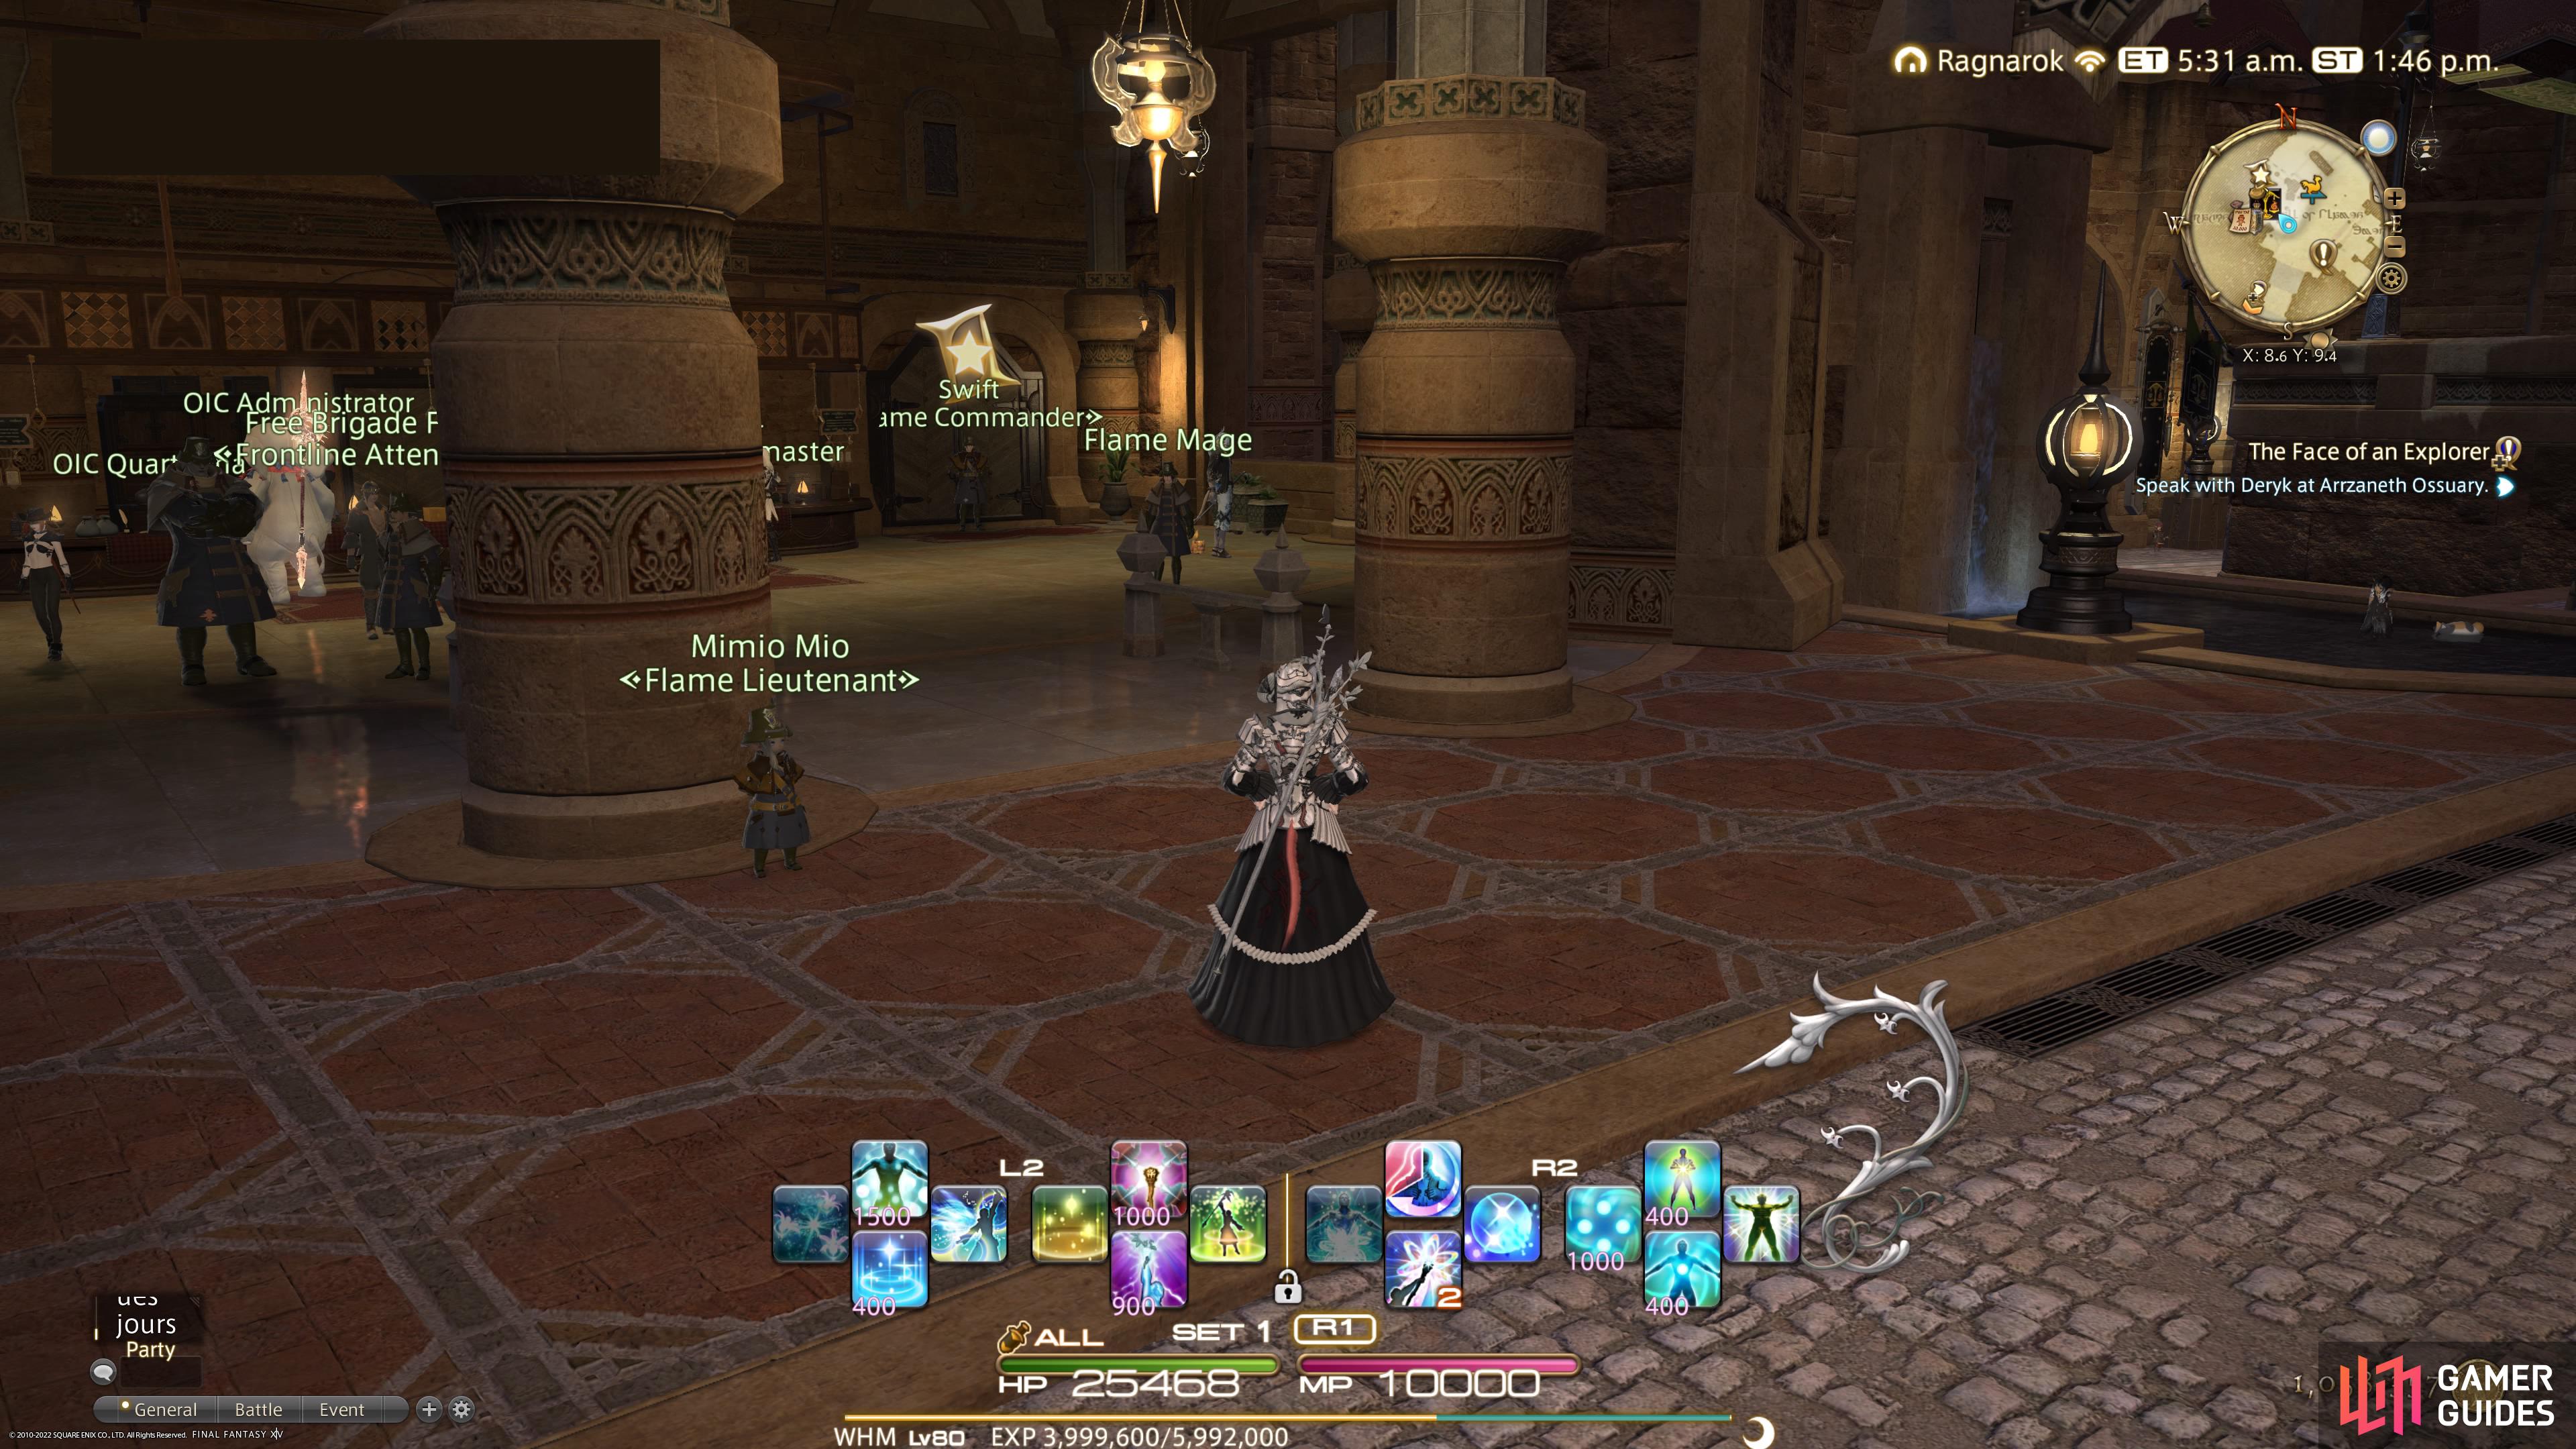 Mimio Mio can be found just outside the Immortal Flames Command.